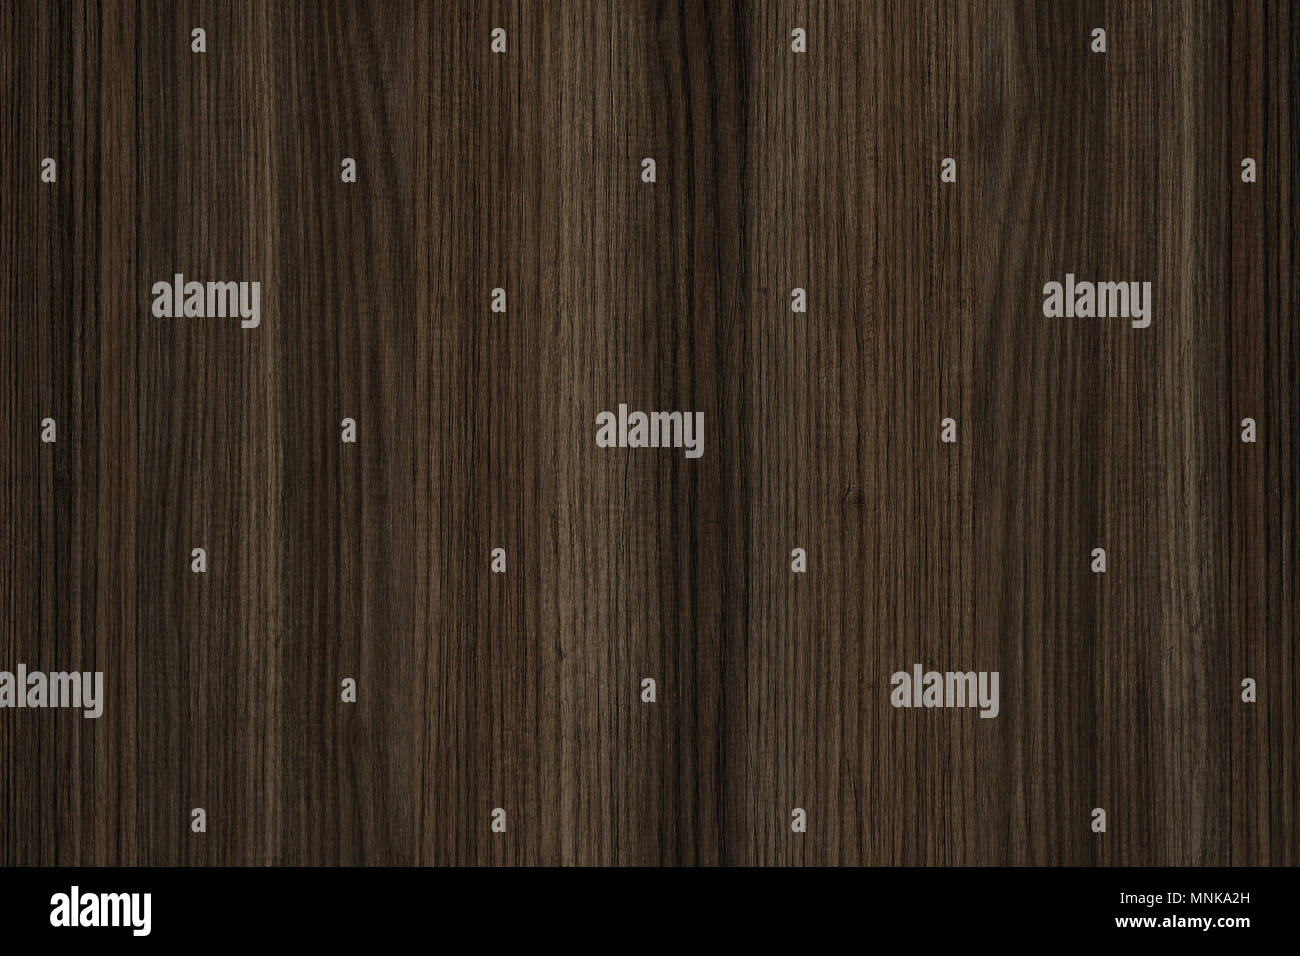 brown grunge wooden texture to use as background, wood texture with natural dark pattern Stock Photo